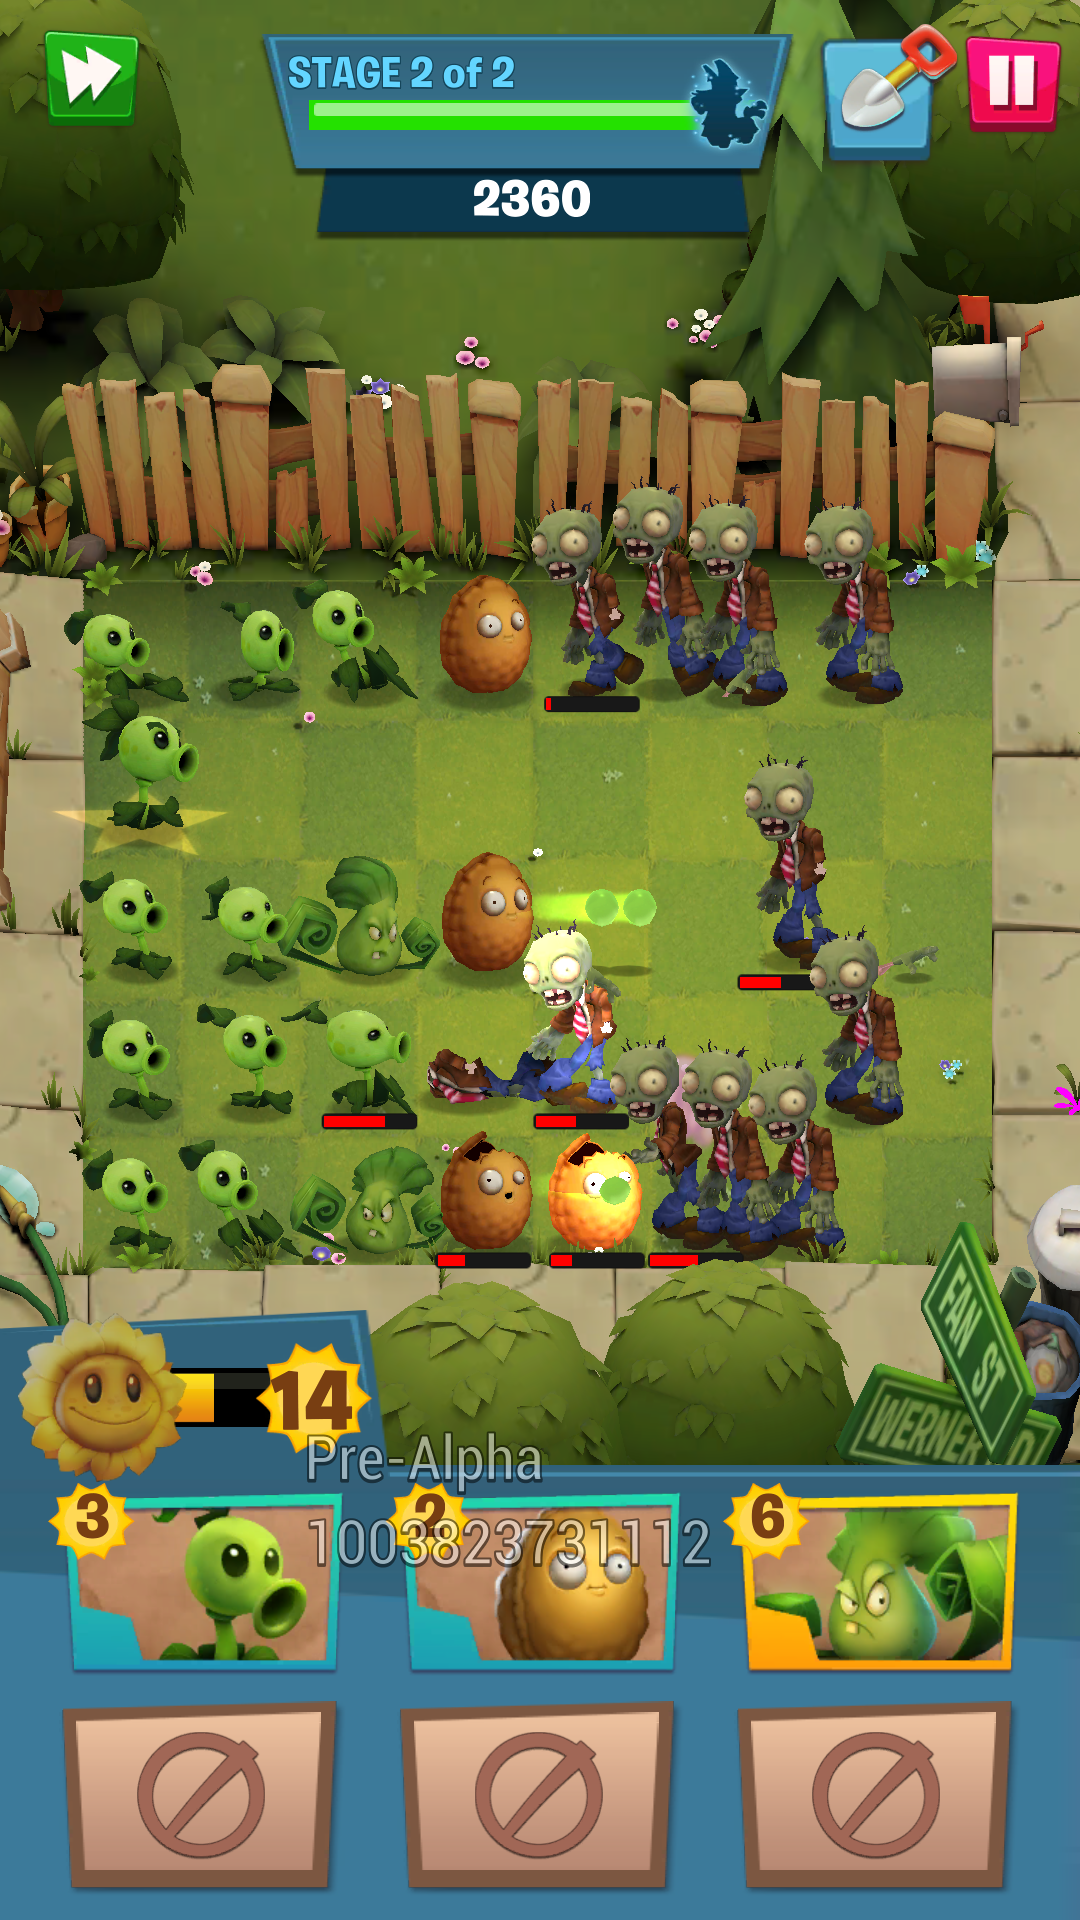 Out of nowhere, Plants vs Zombies 3 is available in pre-alpha